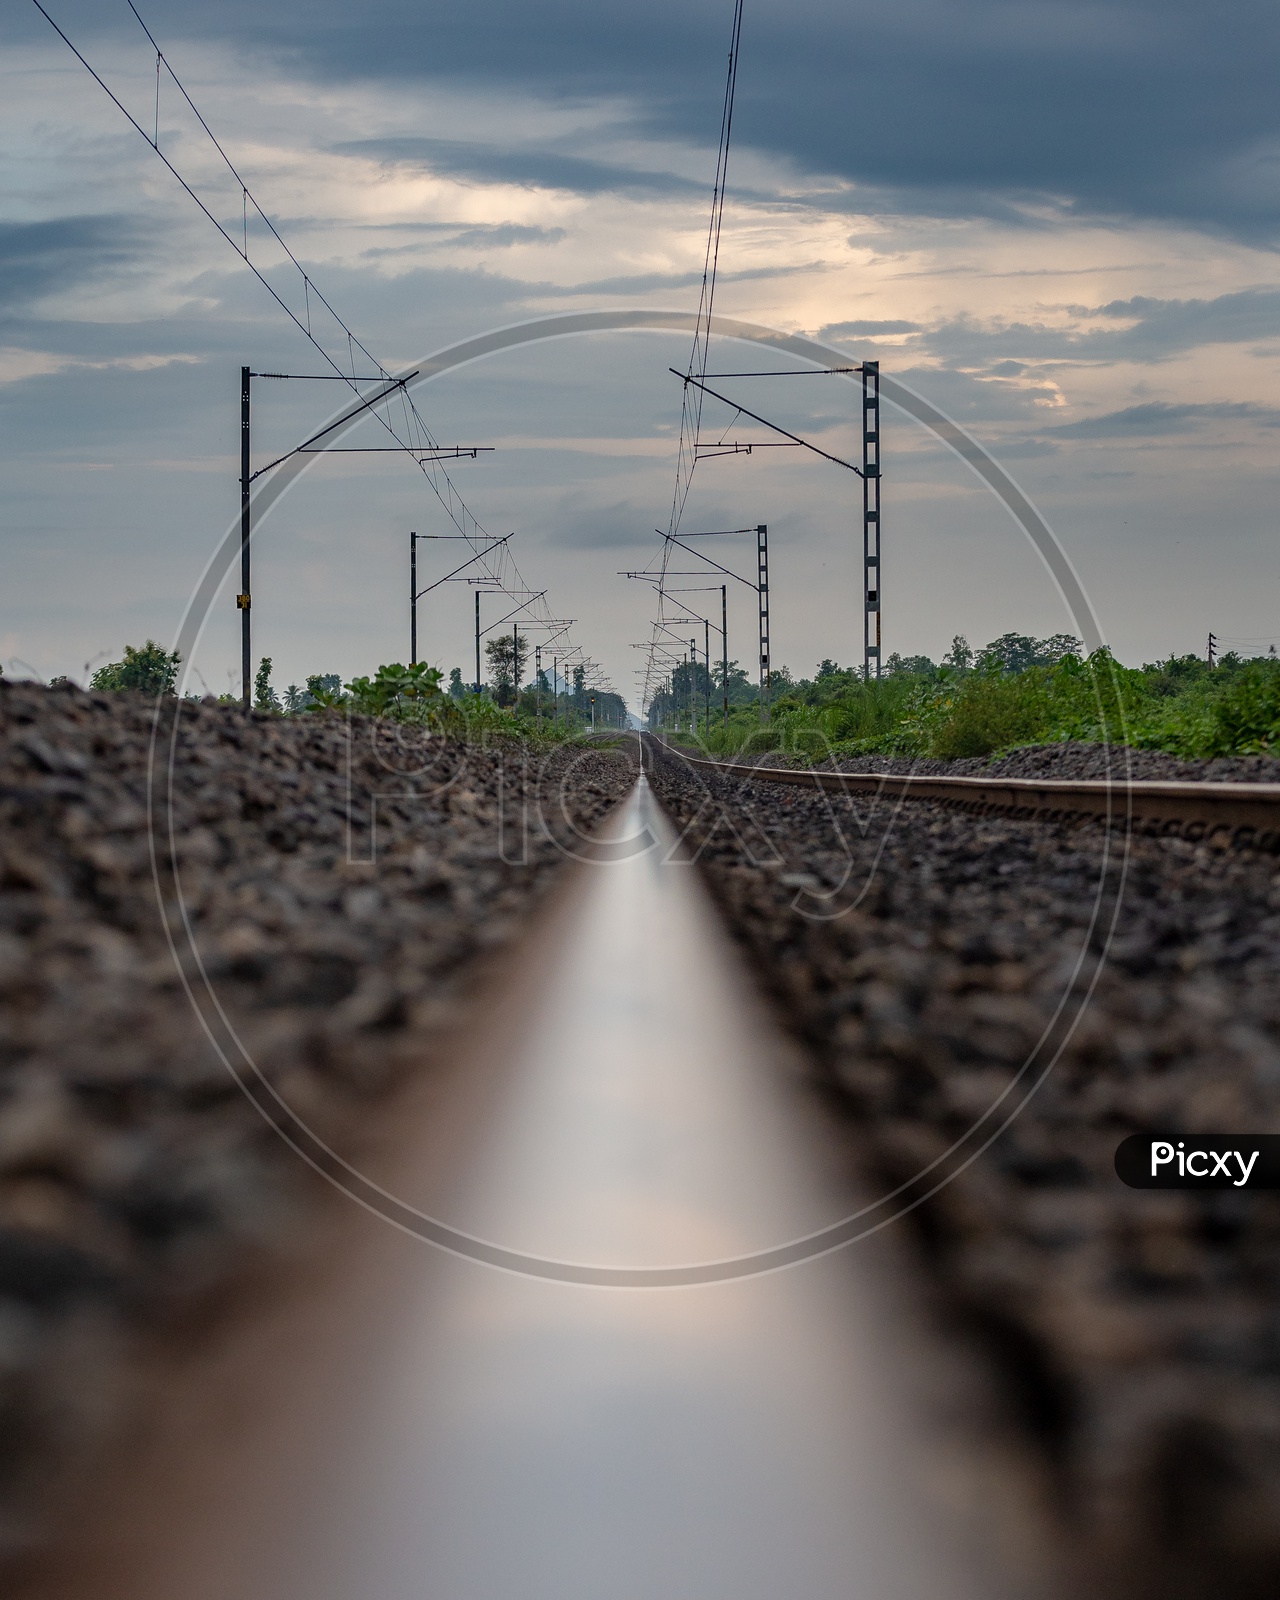 Railway Track With Electricity Poles